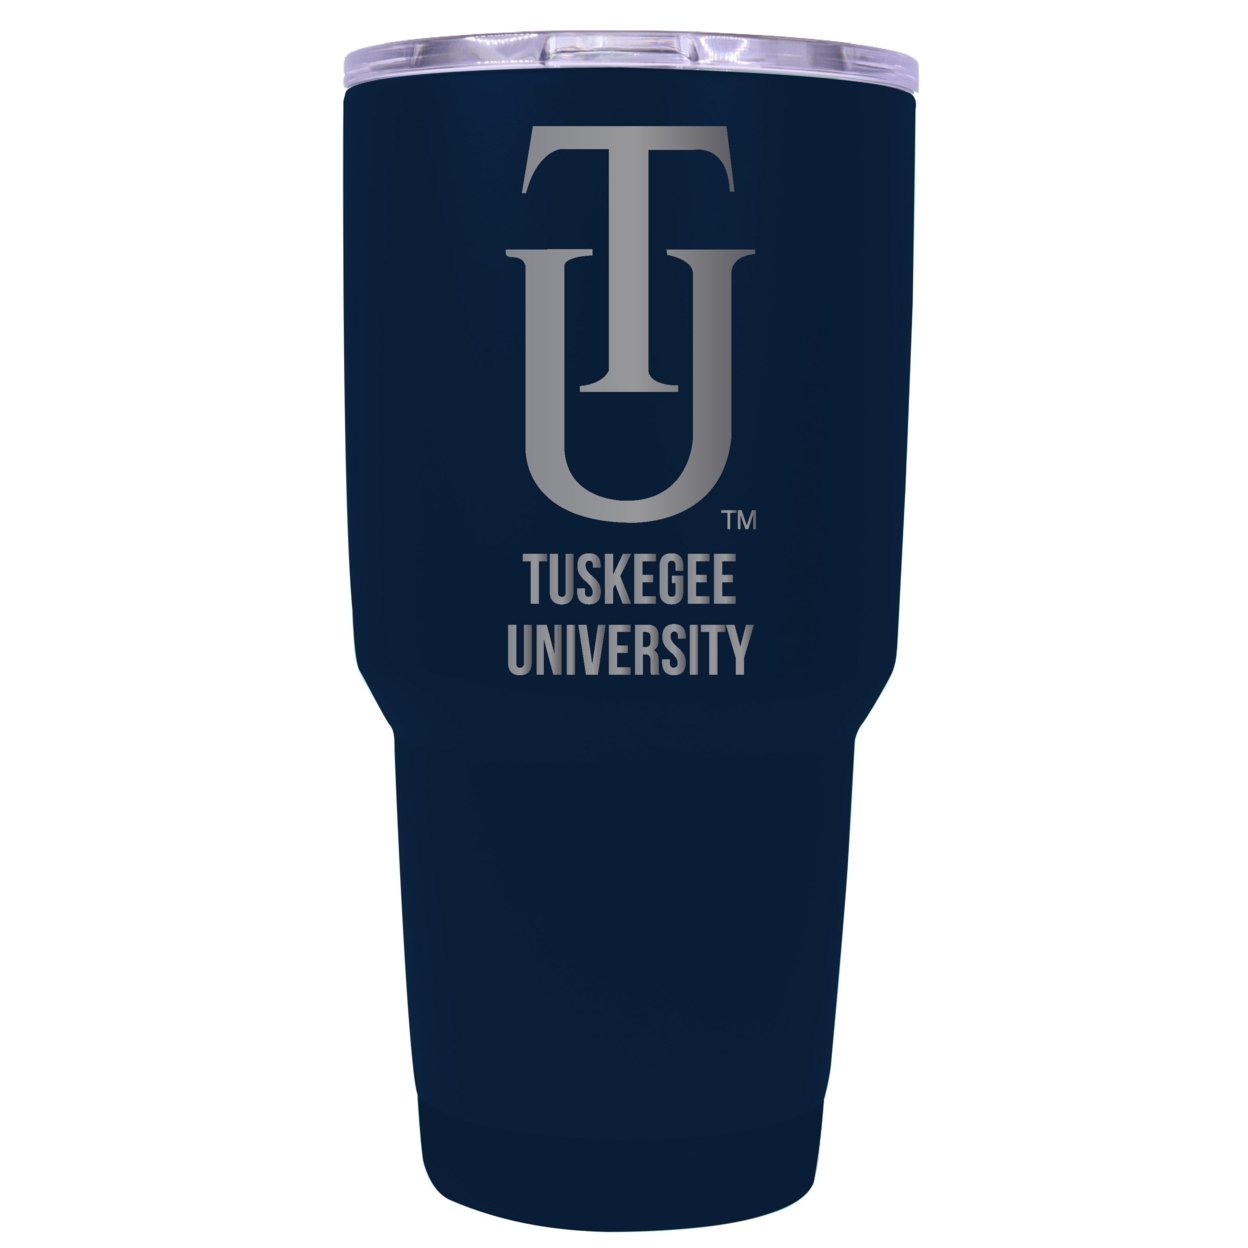 Tuskegee University 24 Oz Laser Engraved Stainless Steel Insulated Tumbler - Choose Your Color. - Navy